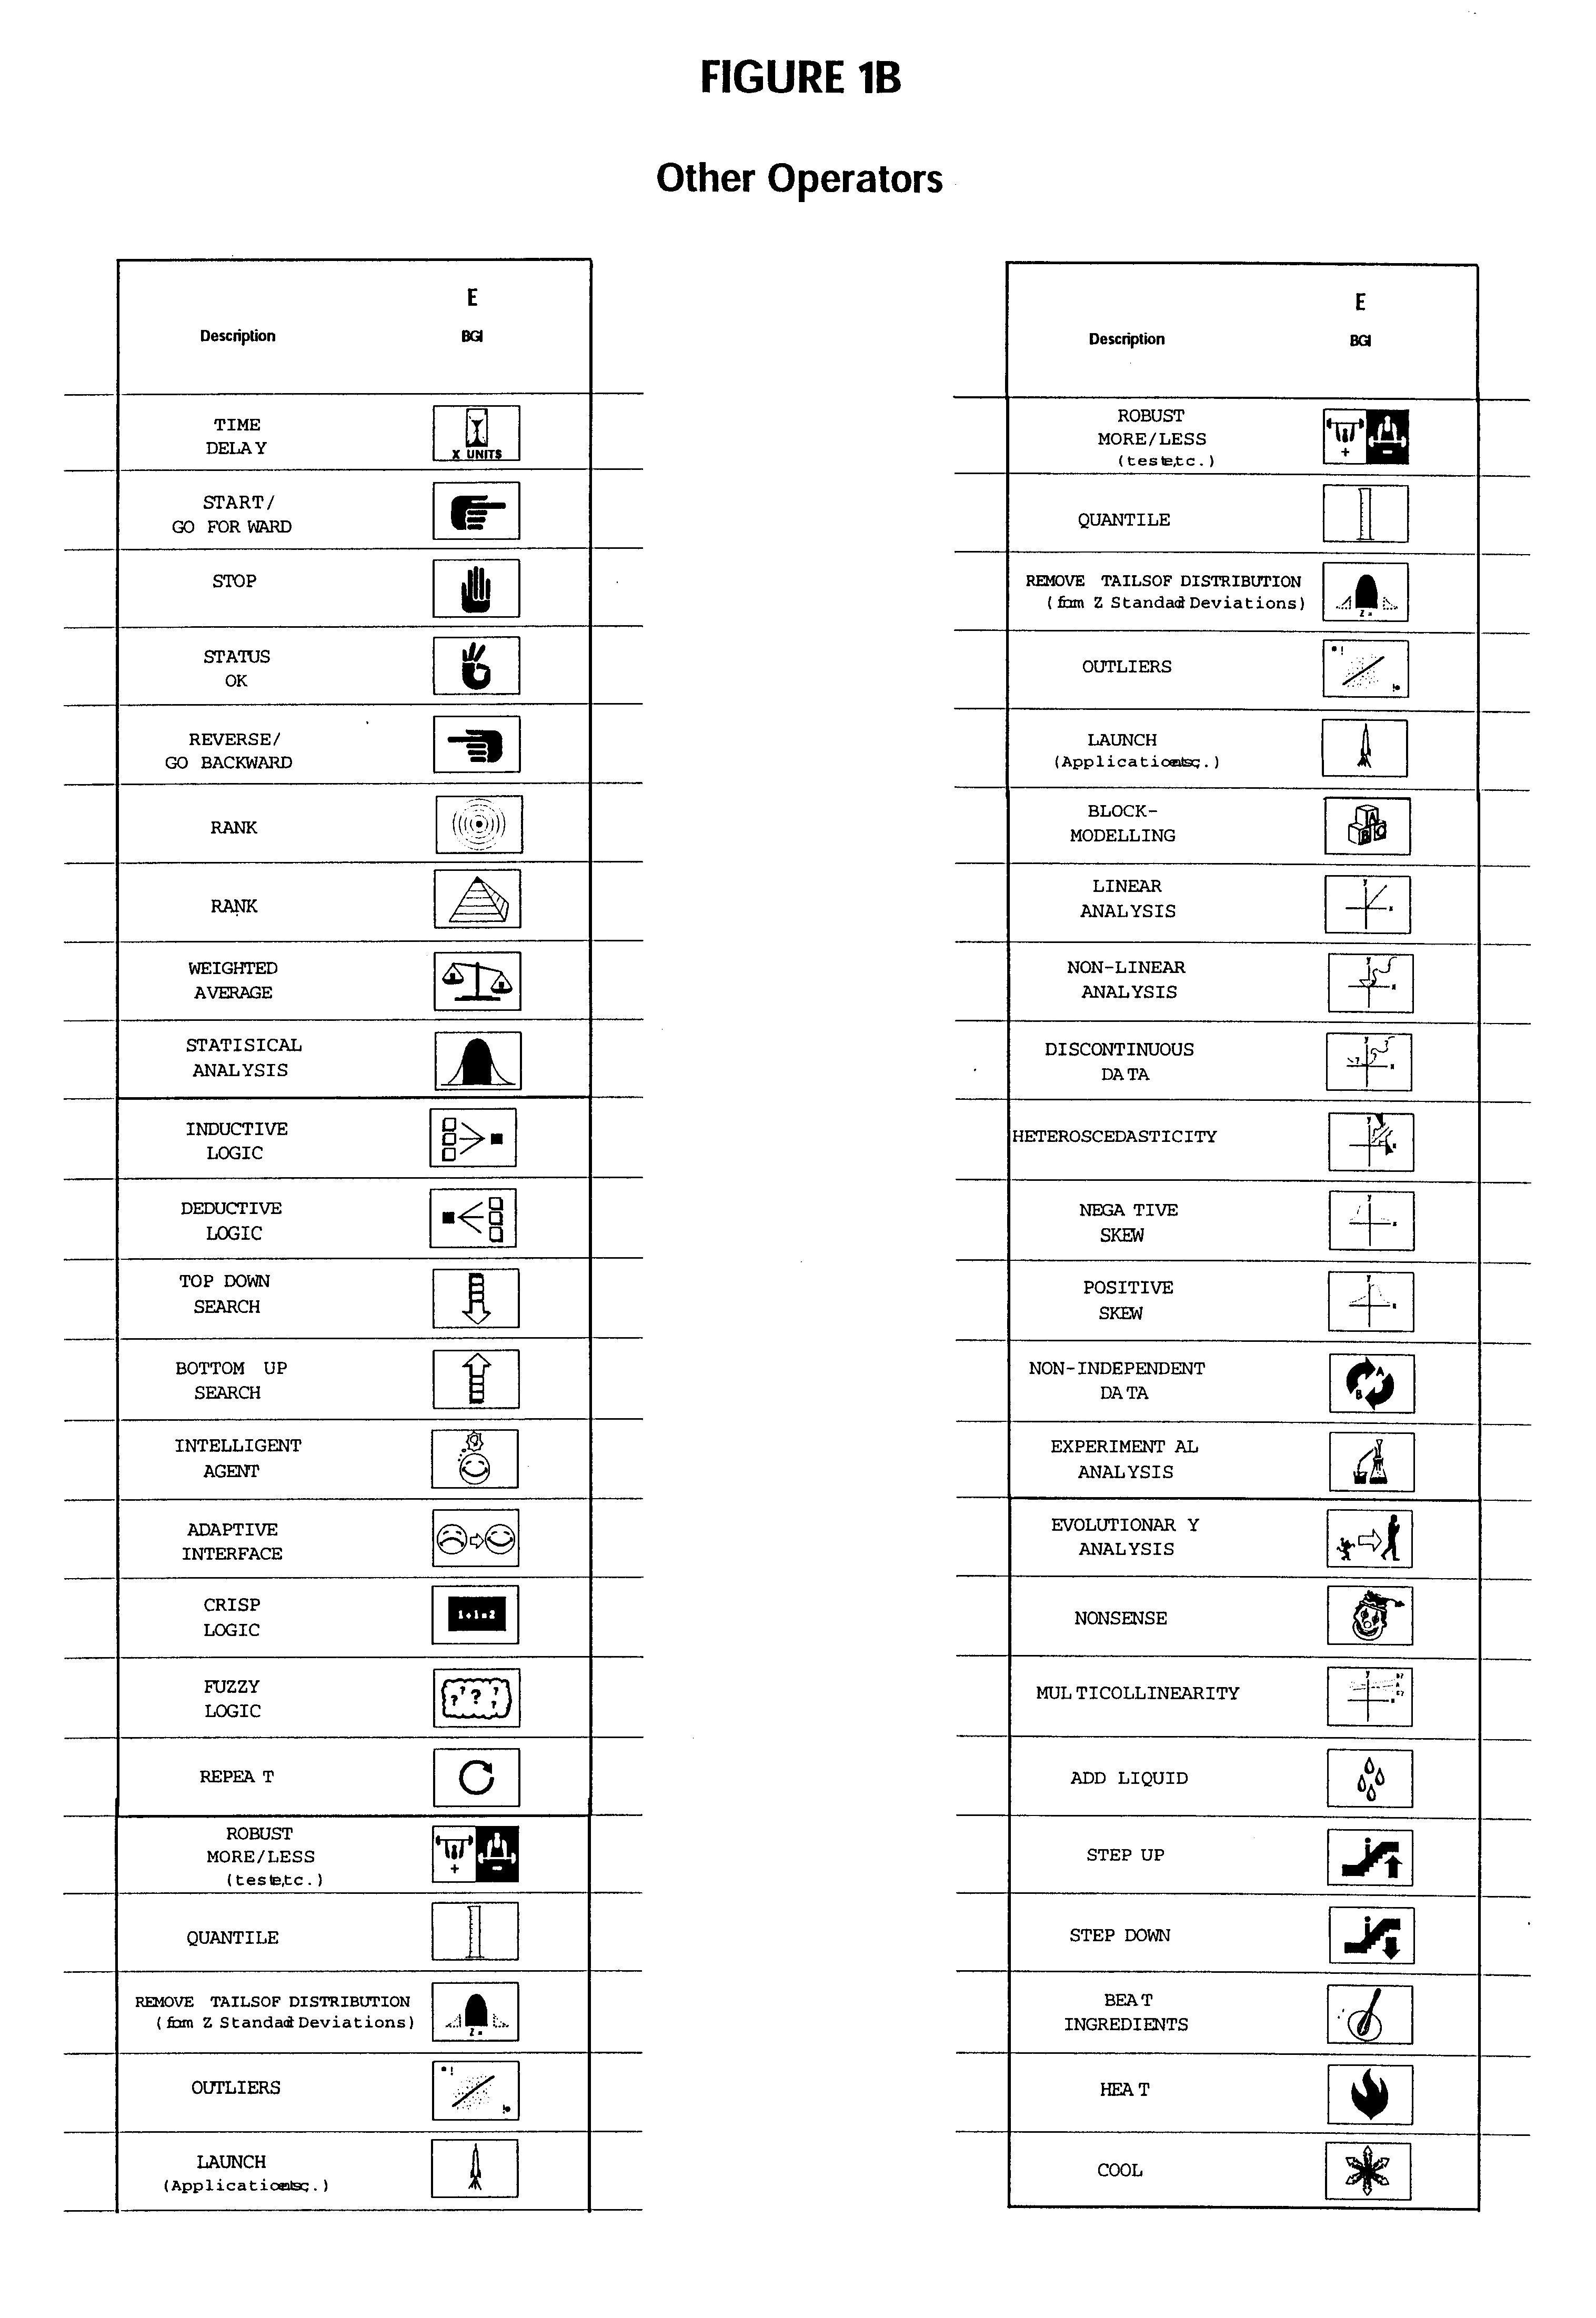 Graphic user interface for database system